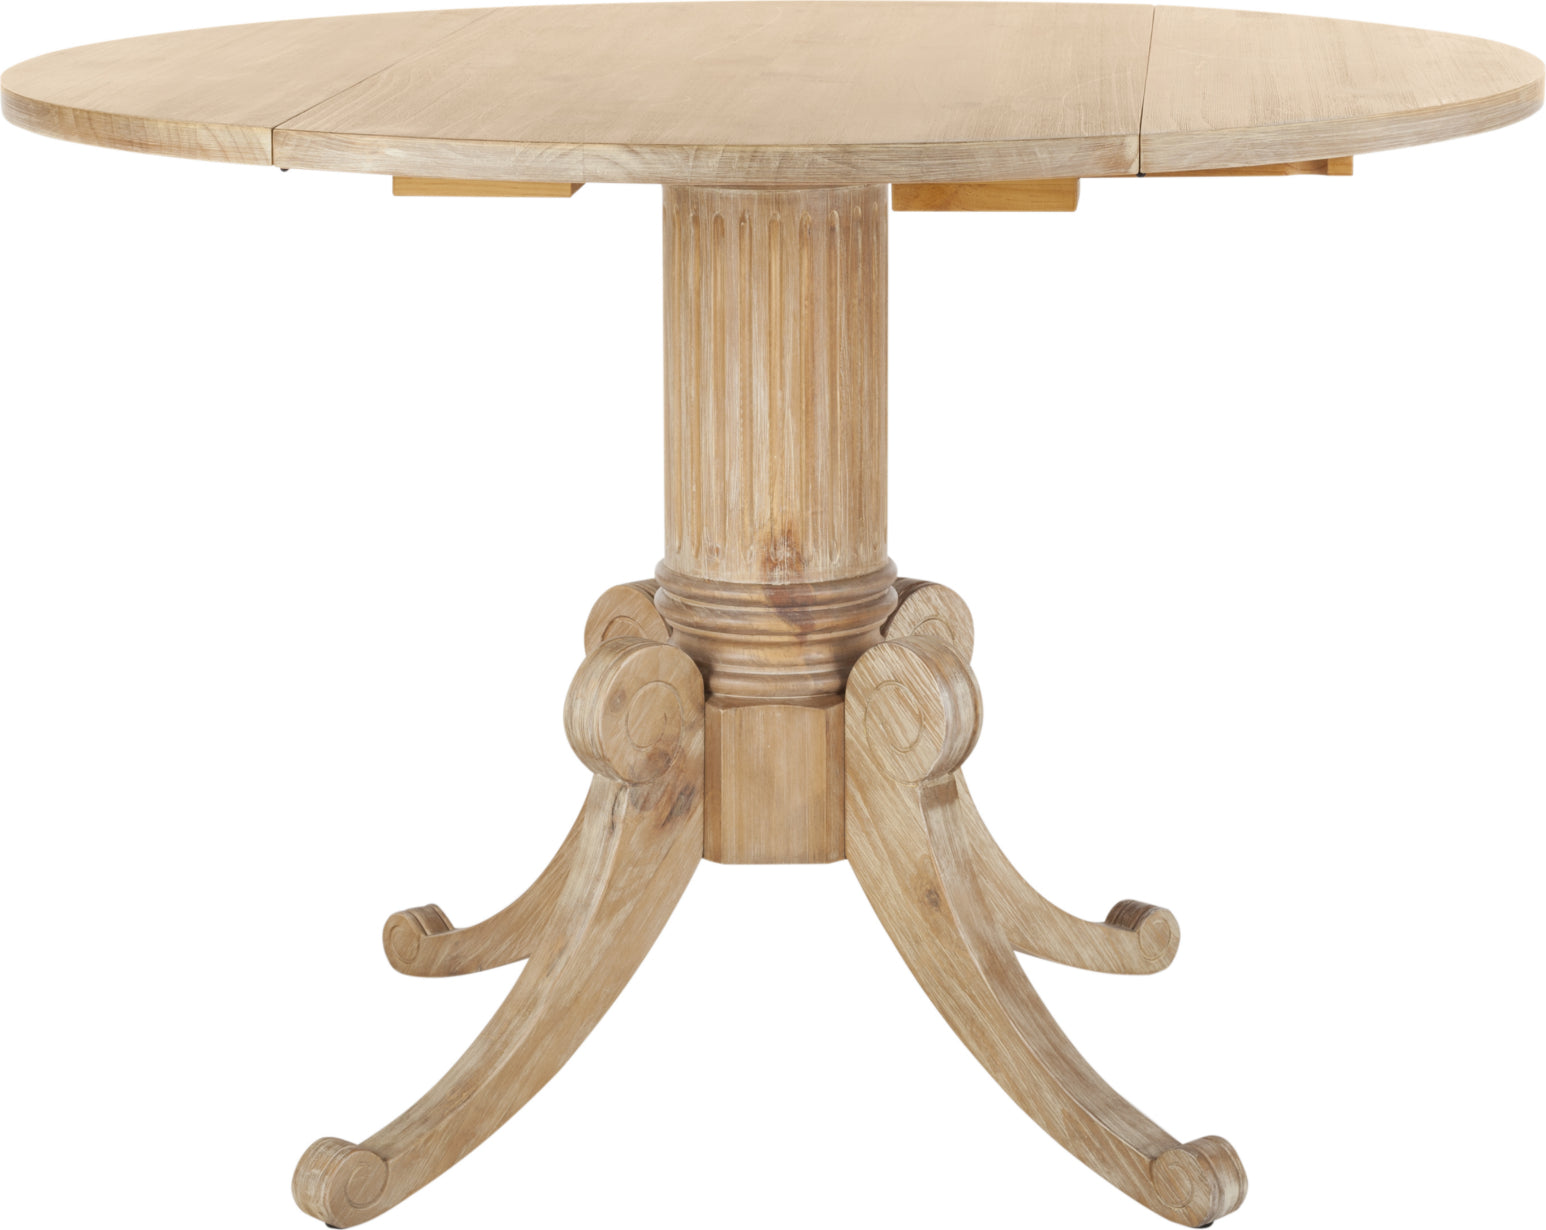 Safavieh Forest Drop Leaf Dining Table Rustic Natural Furniture main image